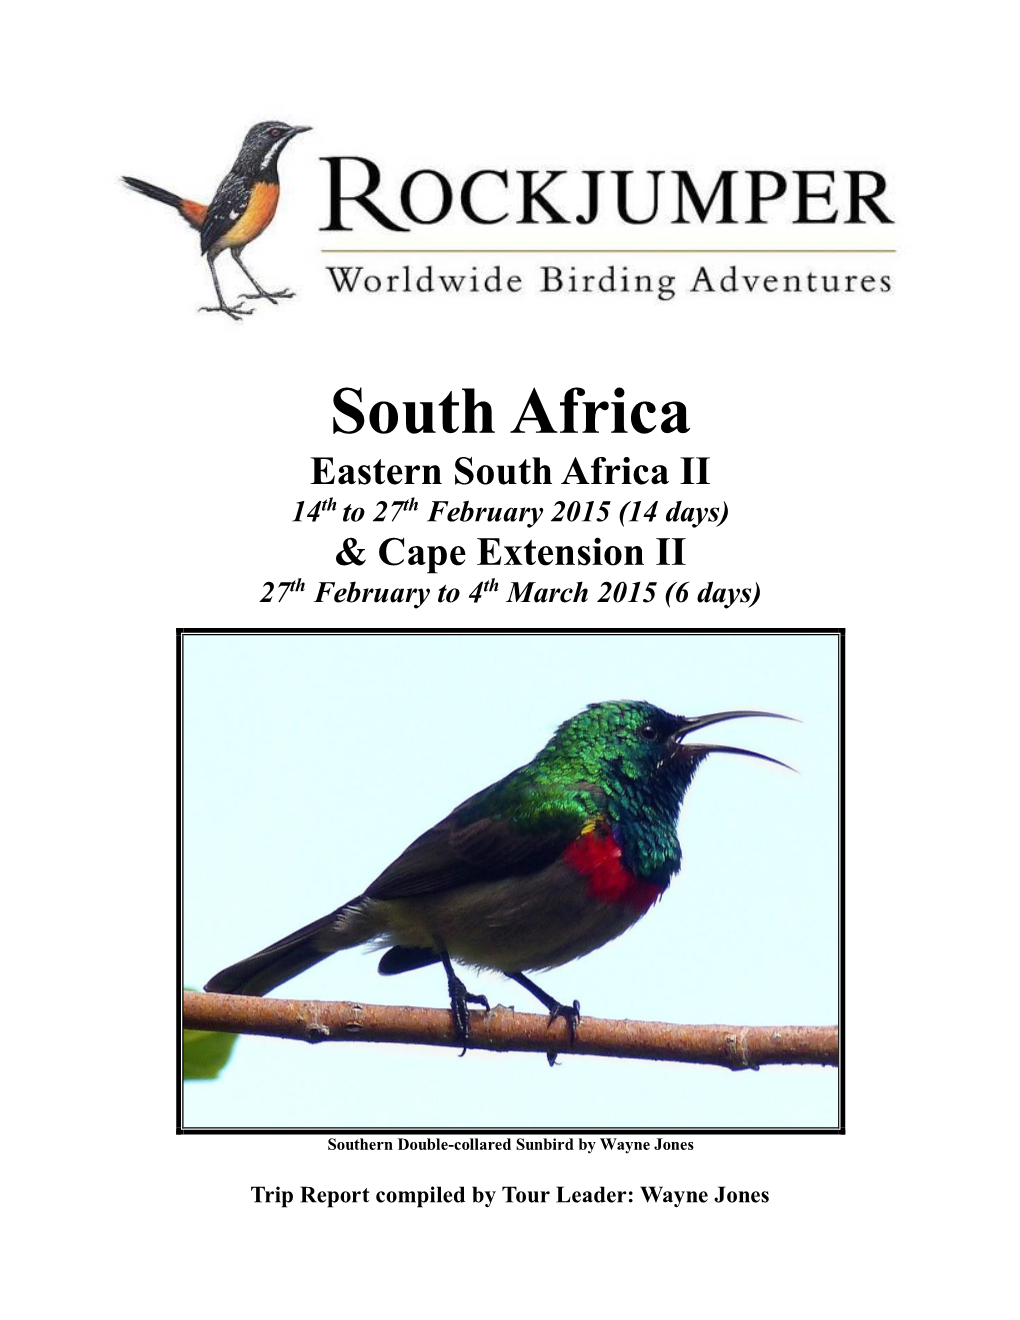 South Africa Eastern South Africa II 14Th to 27Th February 2015 (14 Days) & Cape Extension II Th Th 27 February to 4 March 2015 (6 Days)